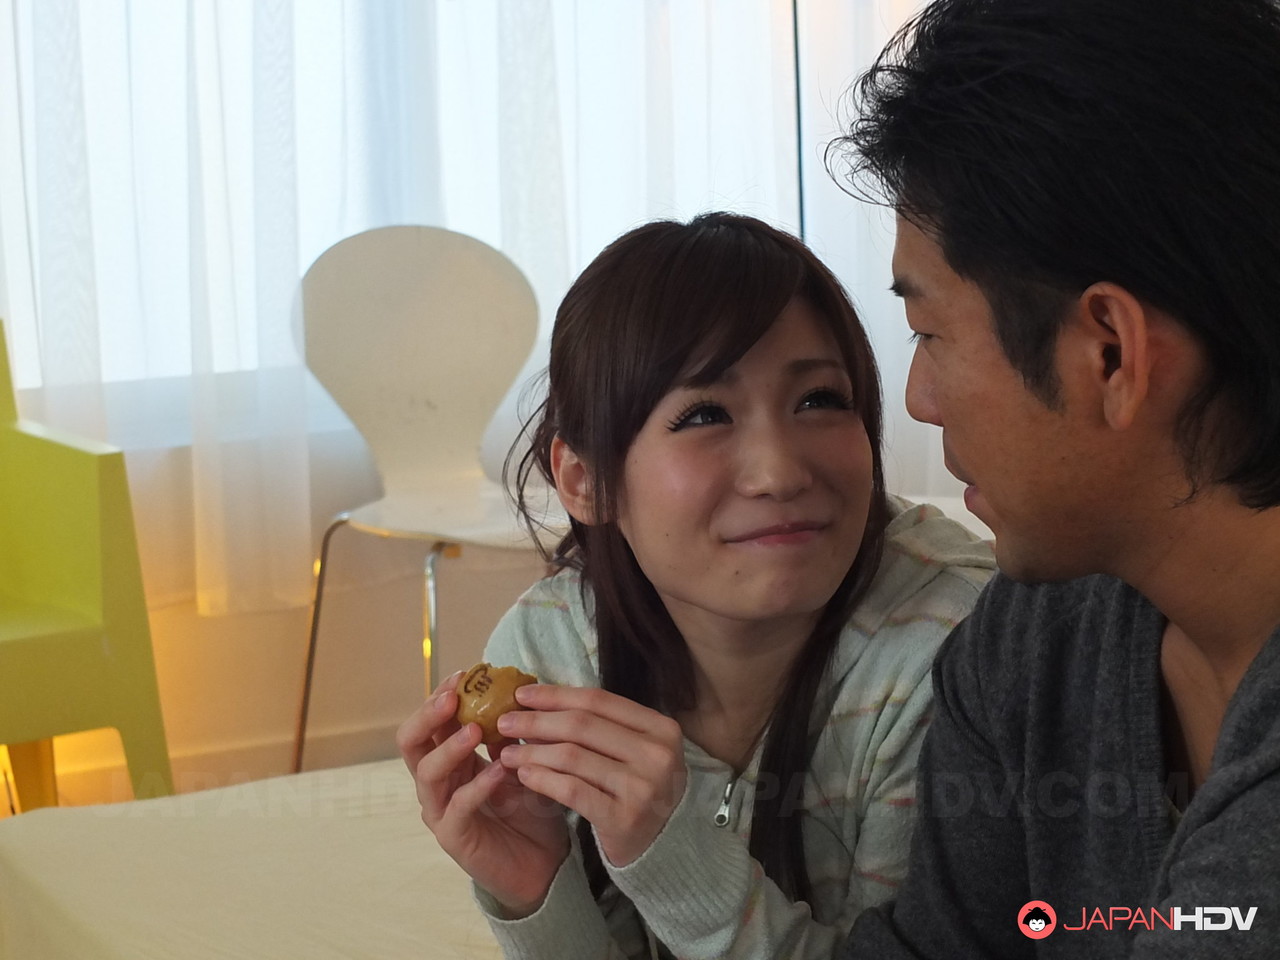 Asian nymphos with hot bodies Koi Miyamura and Tsukushi toy each other's clam foto porno #427162243